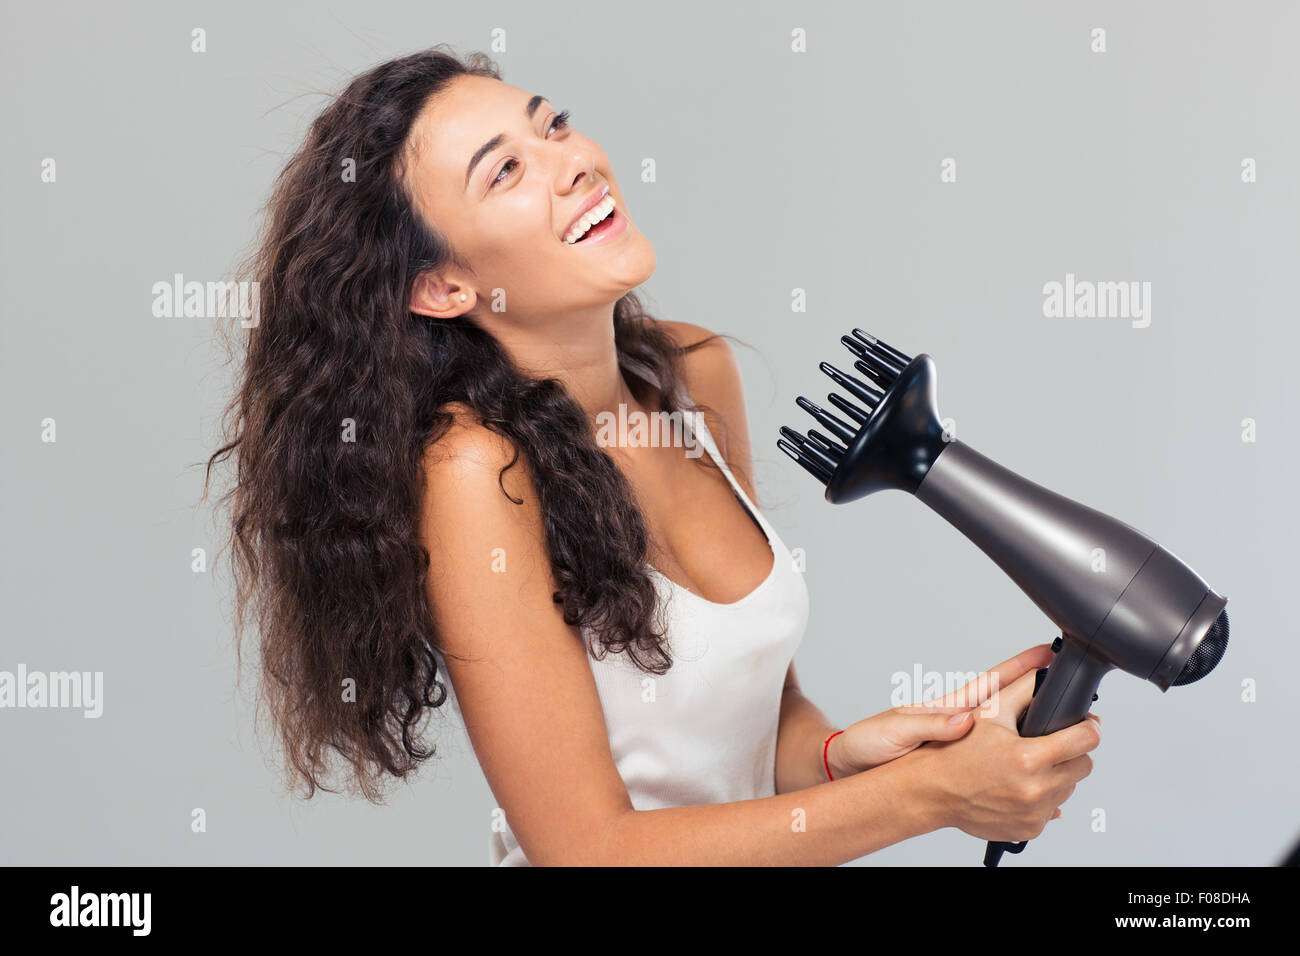 Portrait of a laughing woman dries her hair over gray background Stock Photo